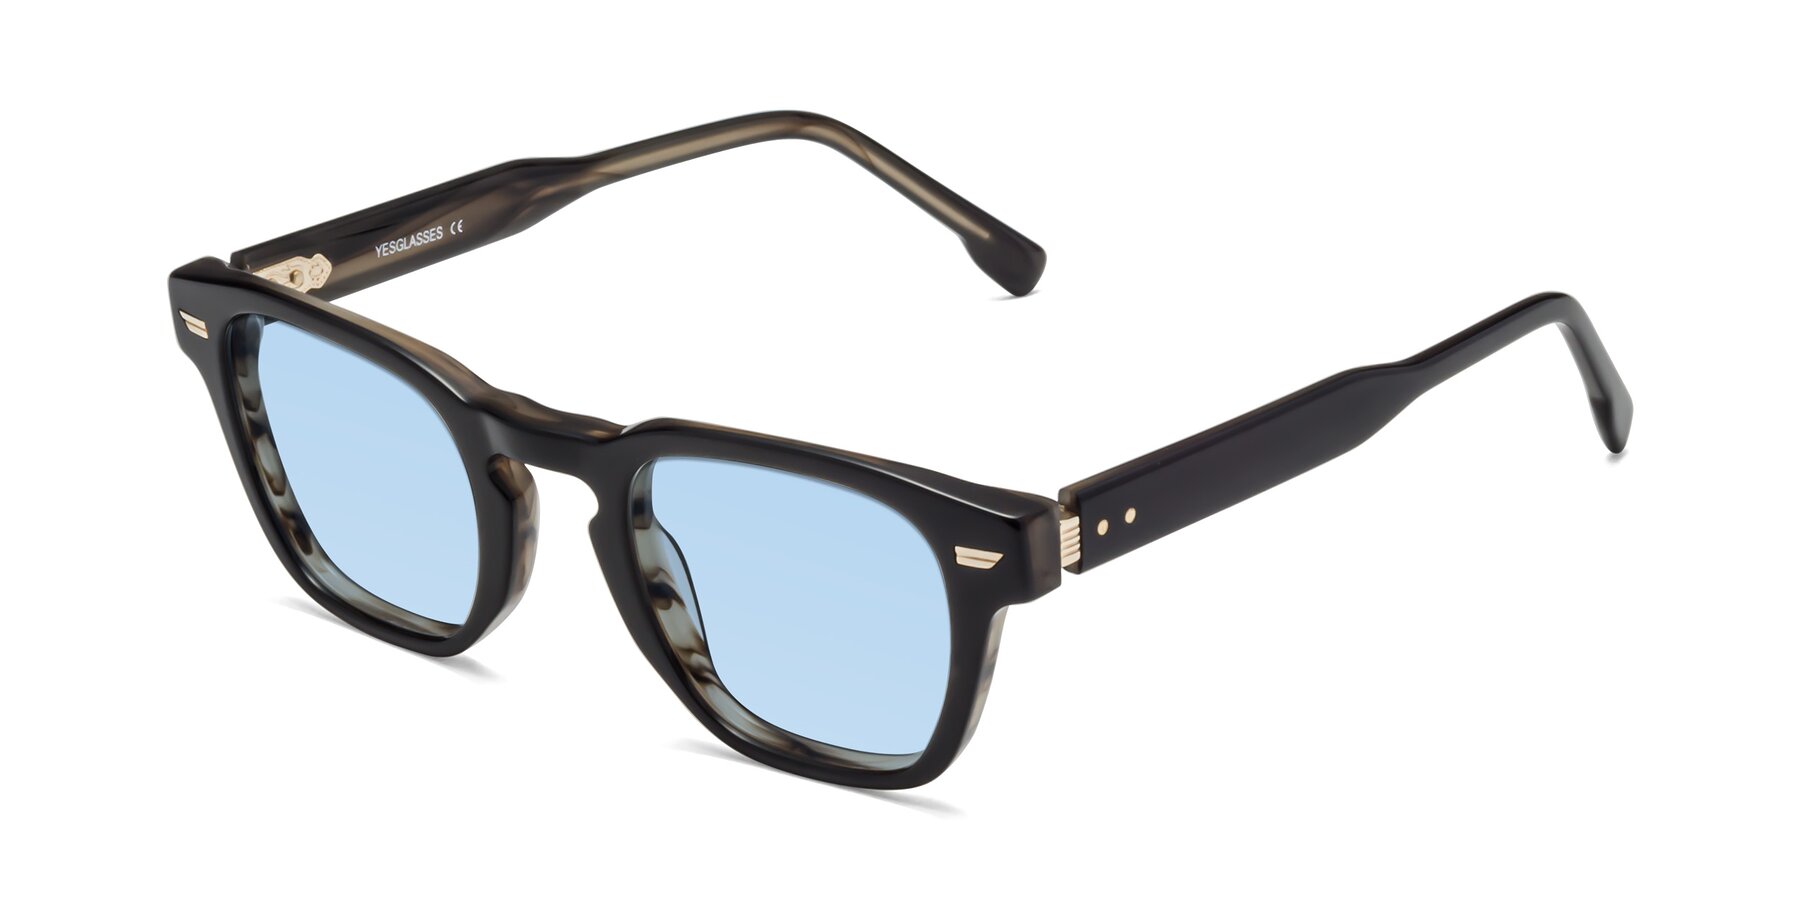 Angle of 1421 in Black-Stripe Brown with Light Blue Tinted Lenses